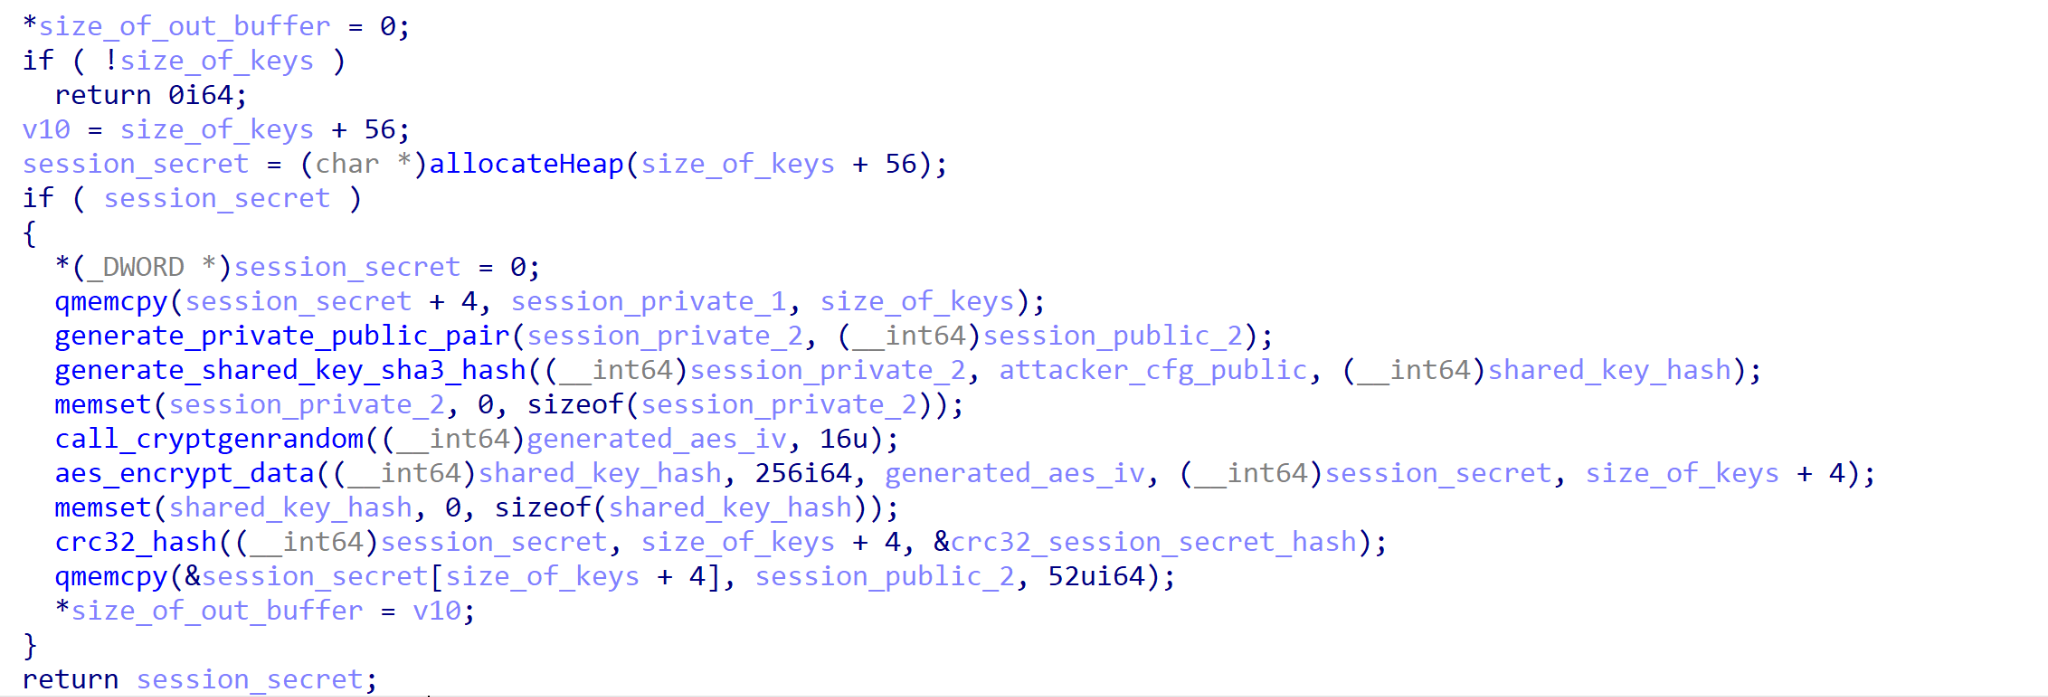 Session secret generation procedure once decompiled. This shows how the encrypted blob is hashed using CRC-32, and then appended with the values session_public_2, the AES IV, and the calculated CRC-32 hash. At the end of the code snippet shown, the session_secret is returned. 